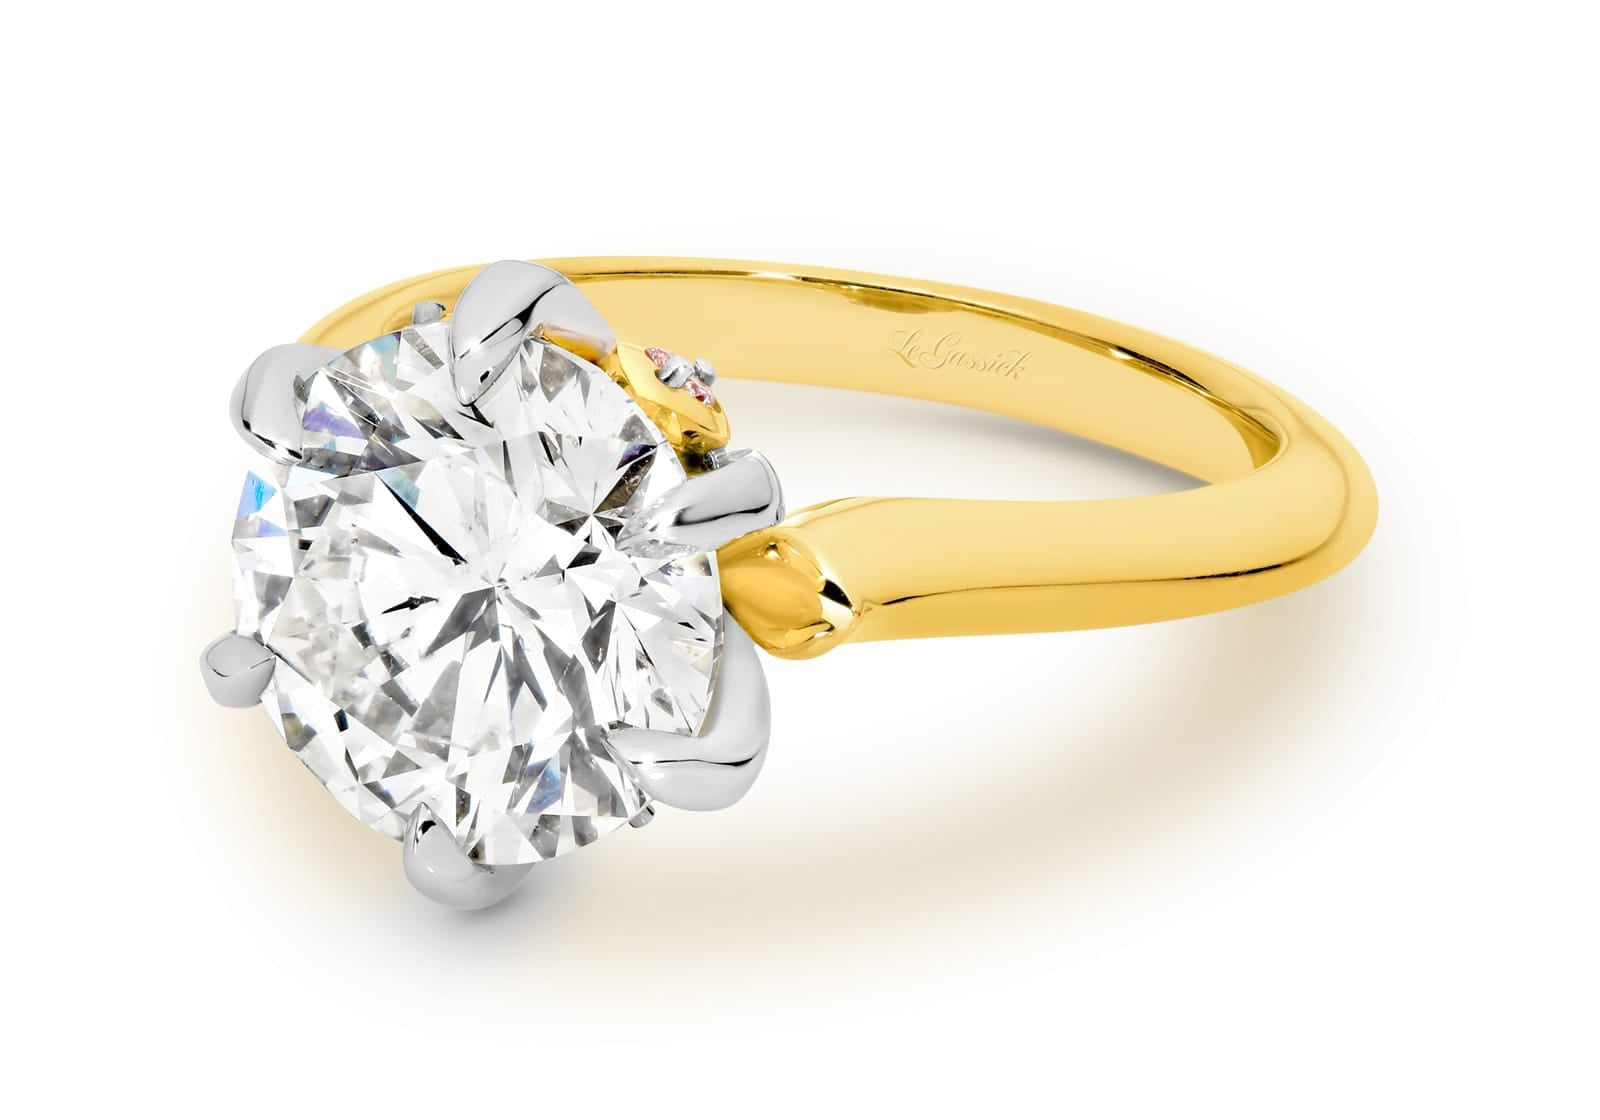 Genevieve 5ct Round Brilliant Cut Solitaire Diamond Ring part of The Beyond Luxury Collection by LeGassick.